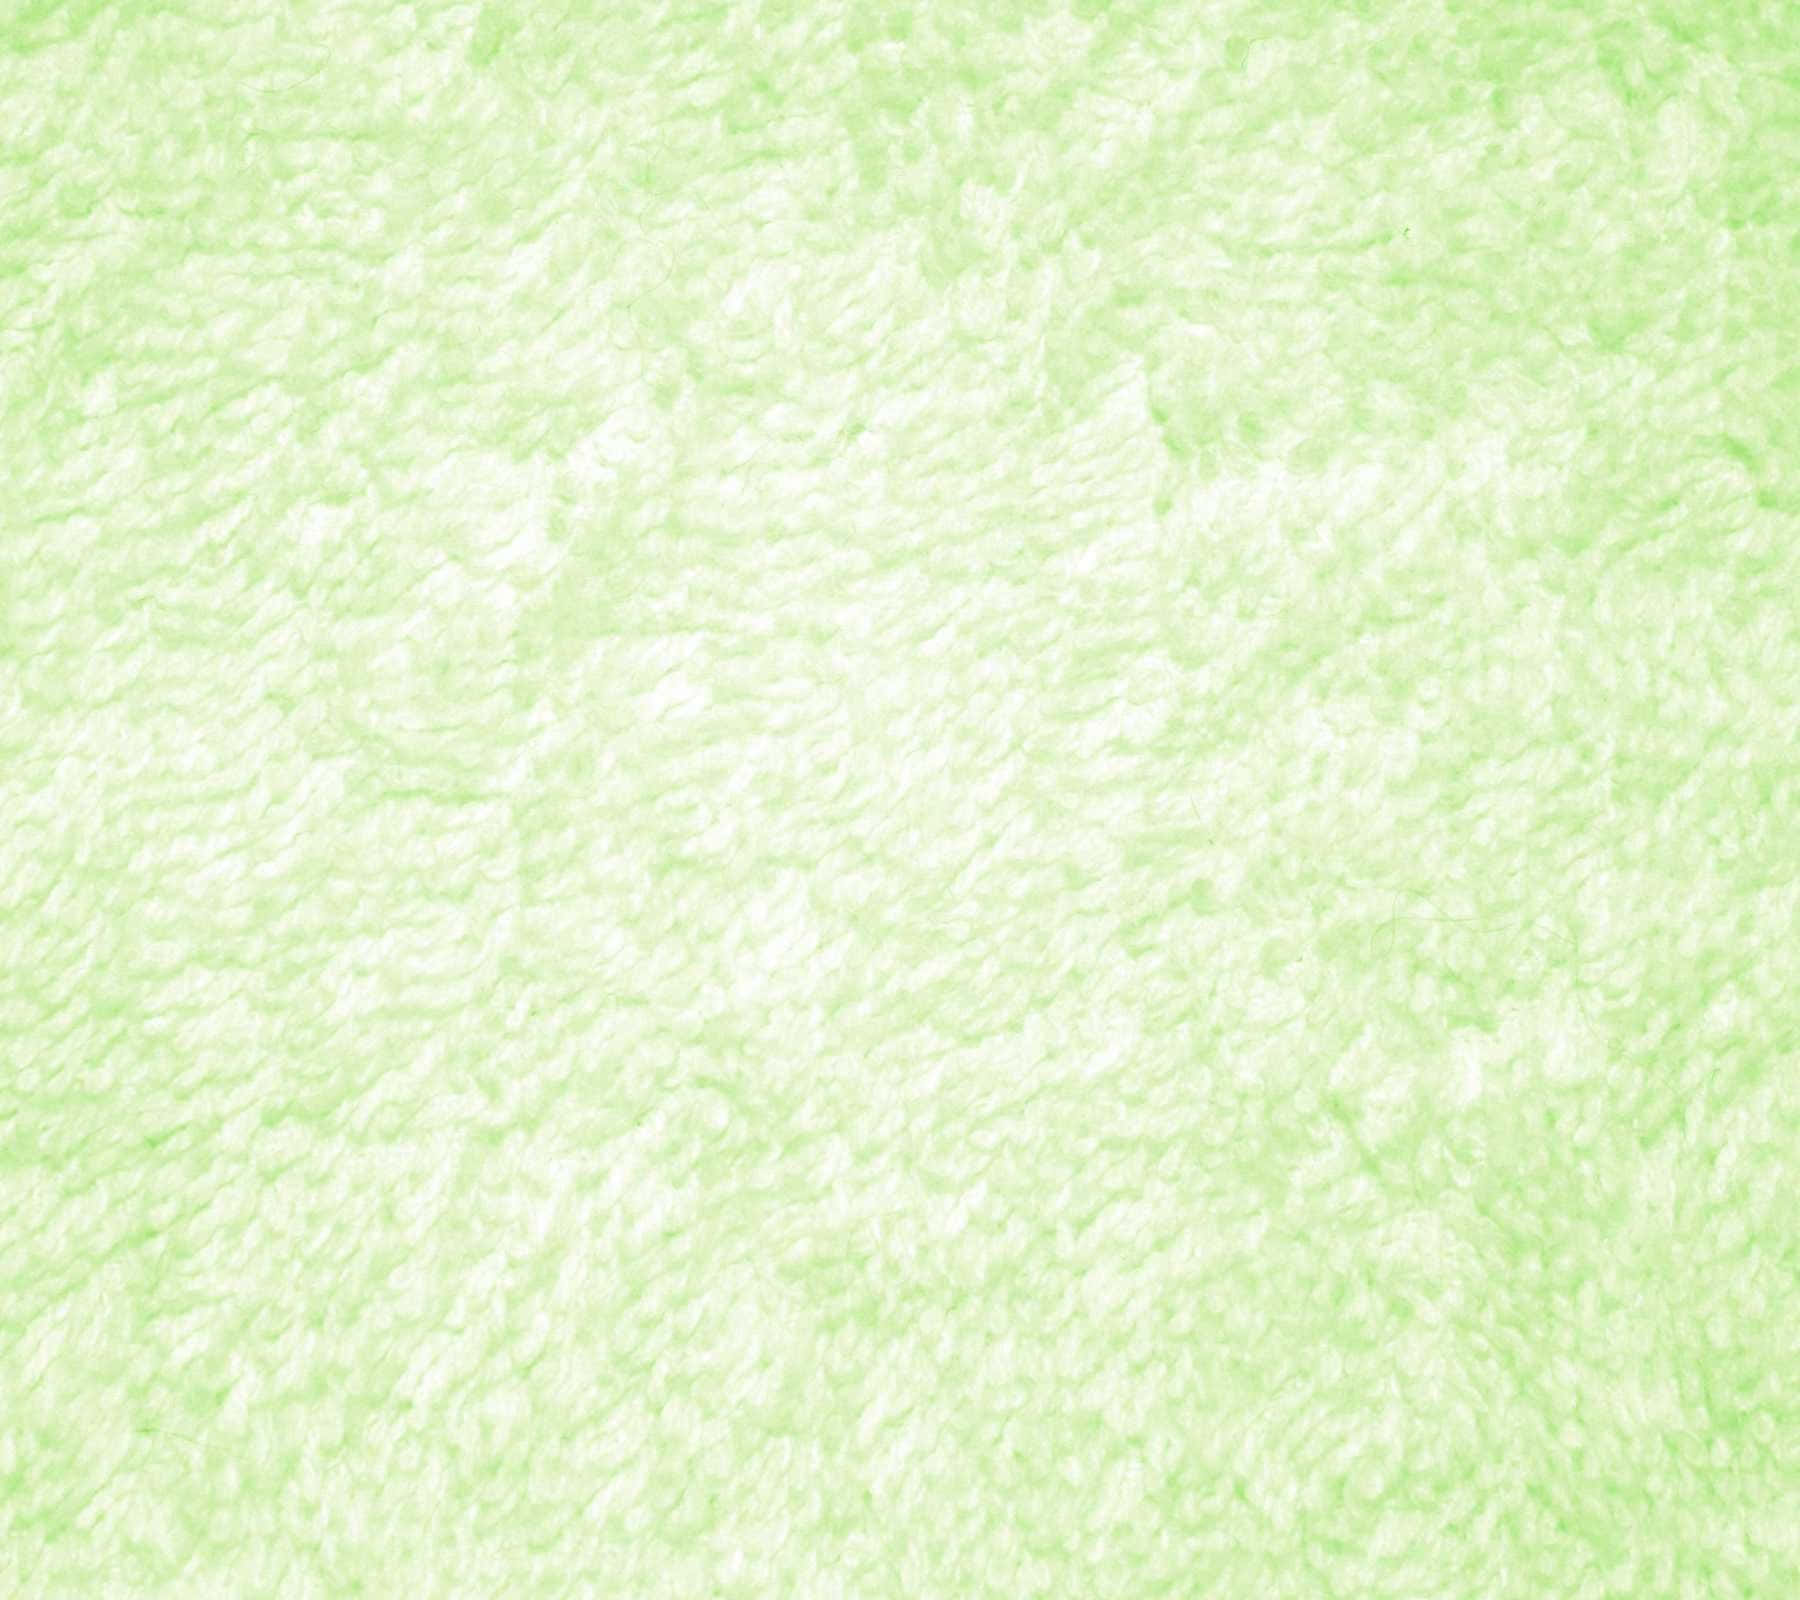 White And Light Green Texture Background